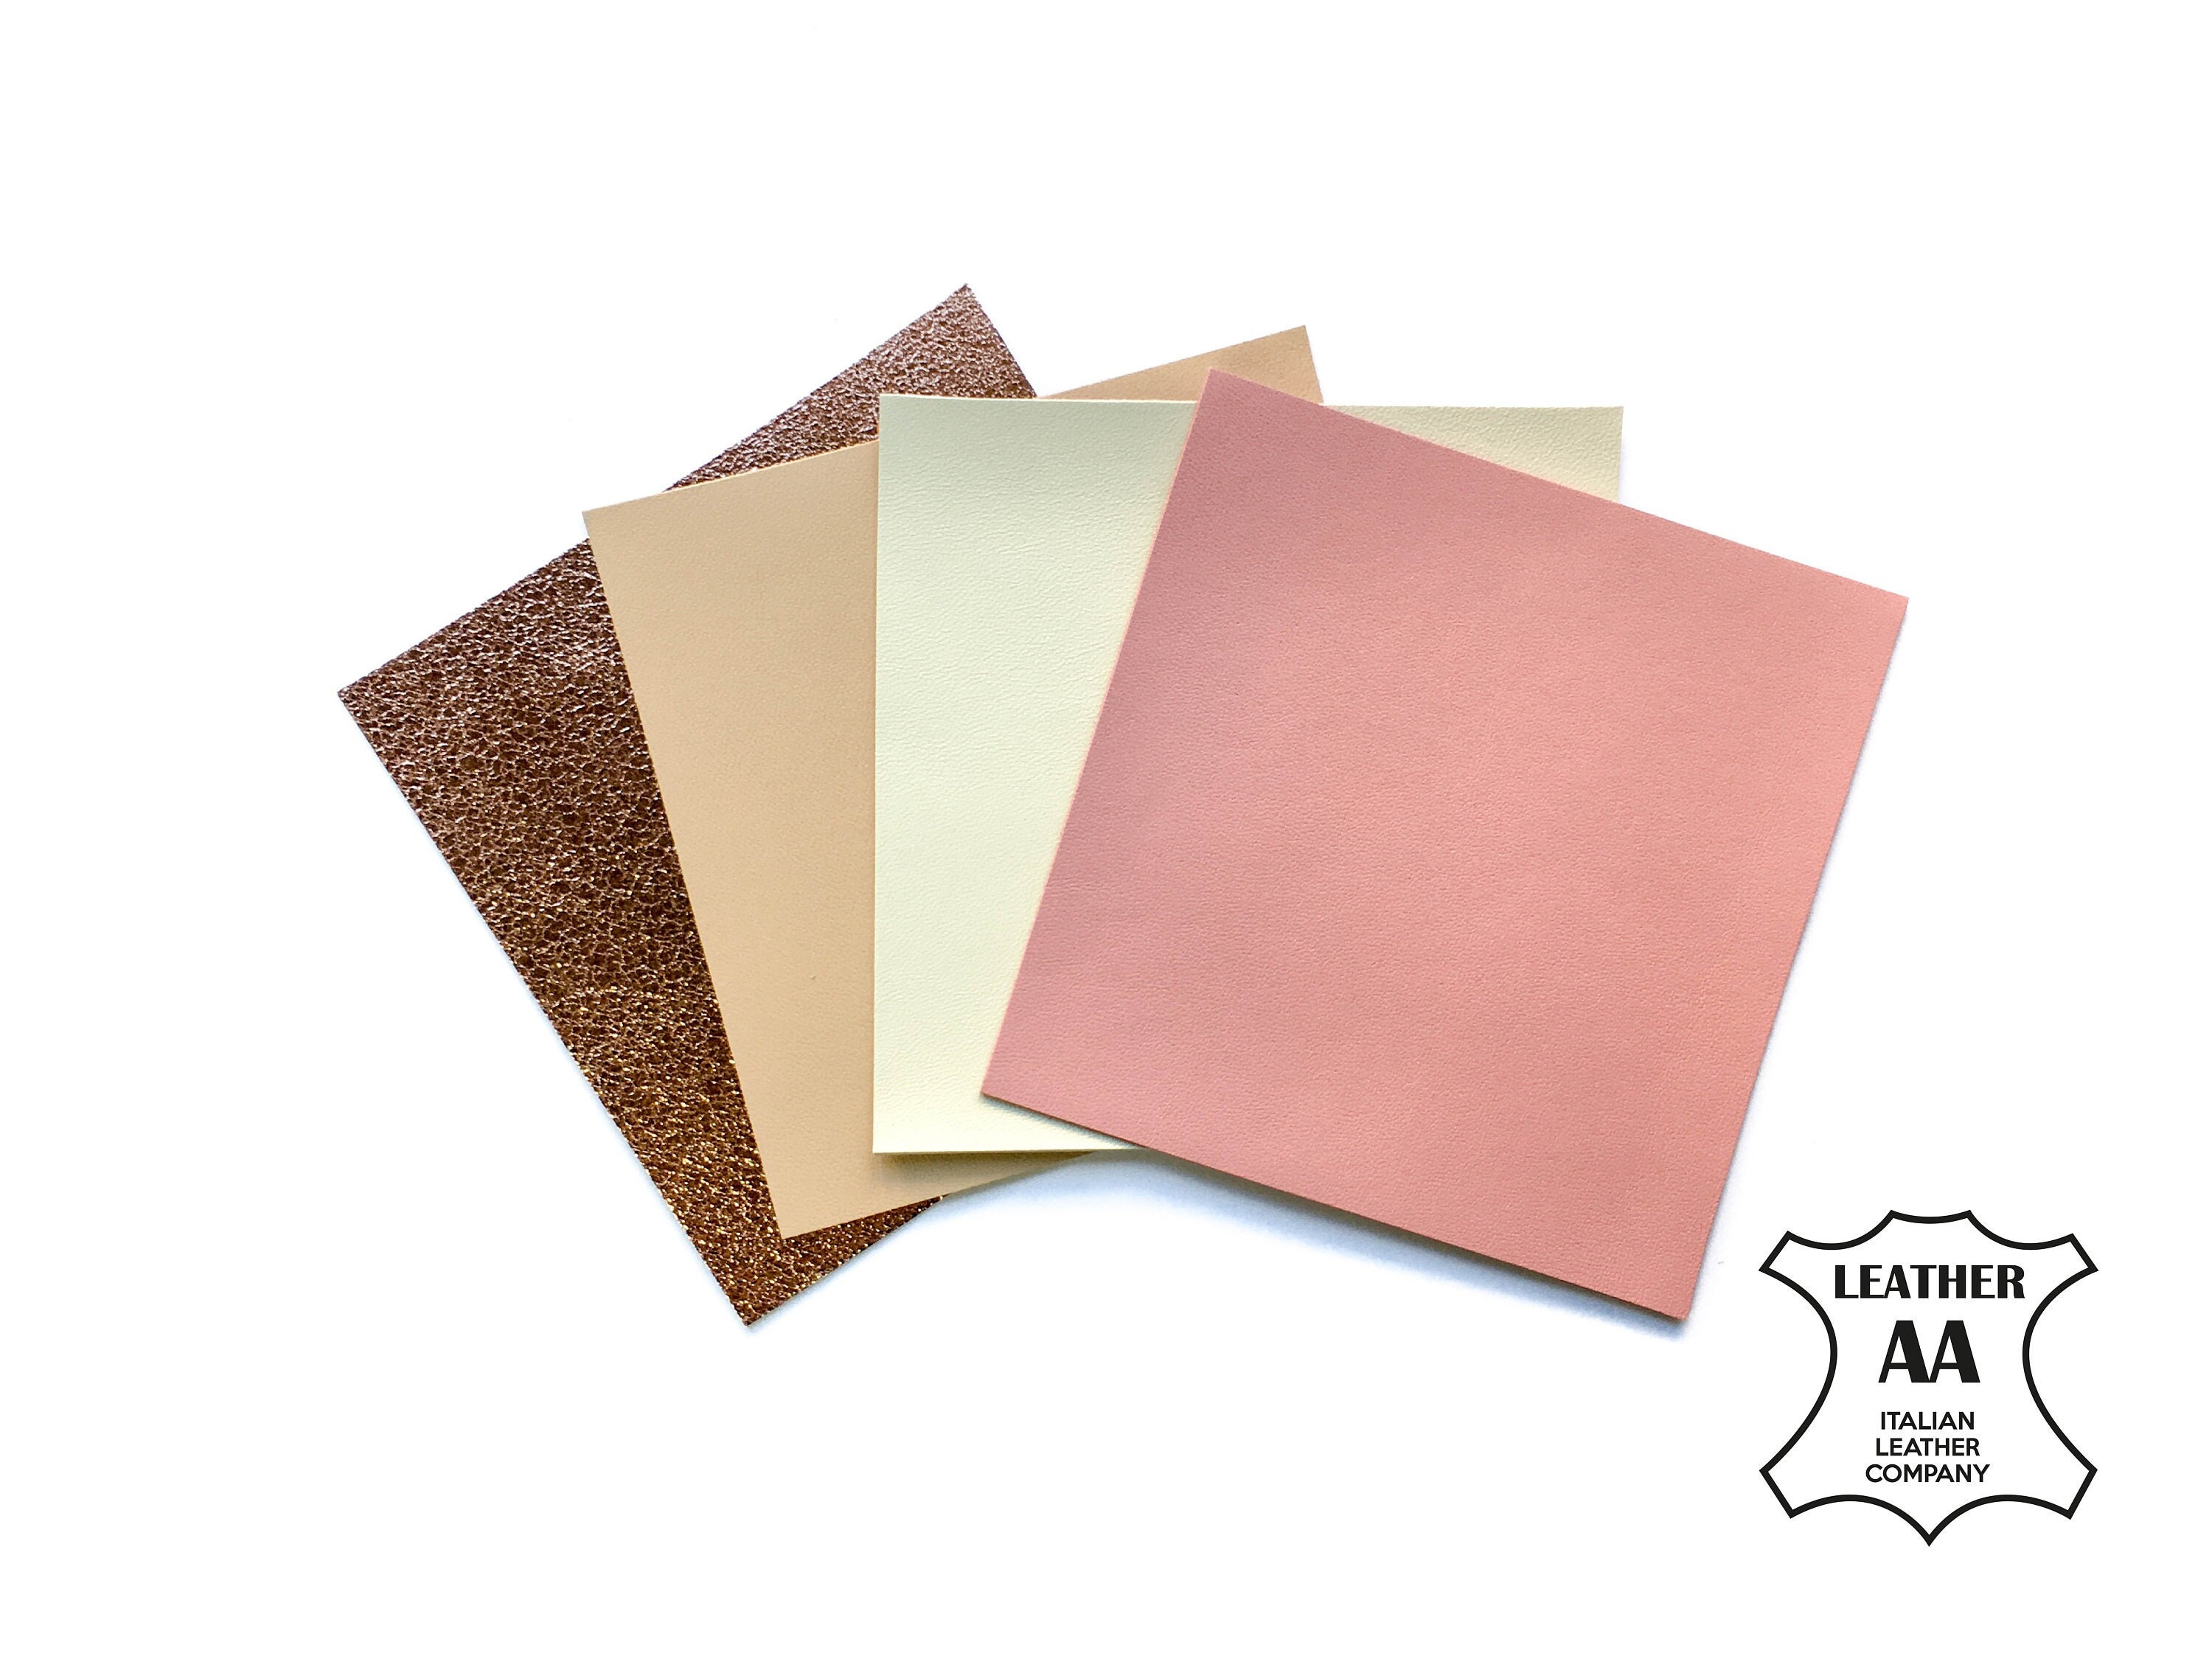  Beige Leather Genuine Sheepskin Leather: Leather 6 Pack in  Pastel Colors Each Leather Piece is 5x5 inches Large and Ready for Crafting